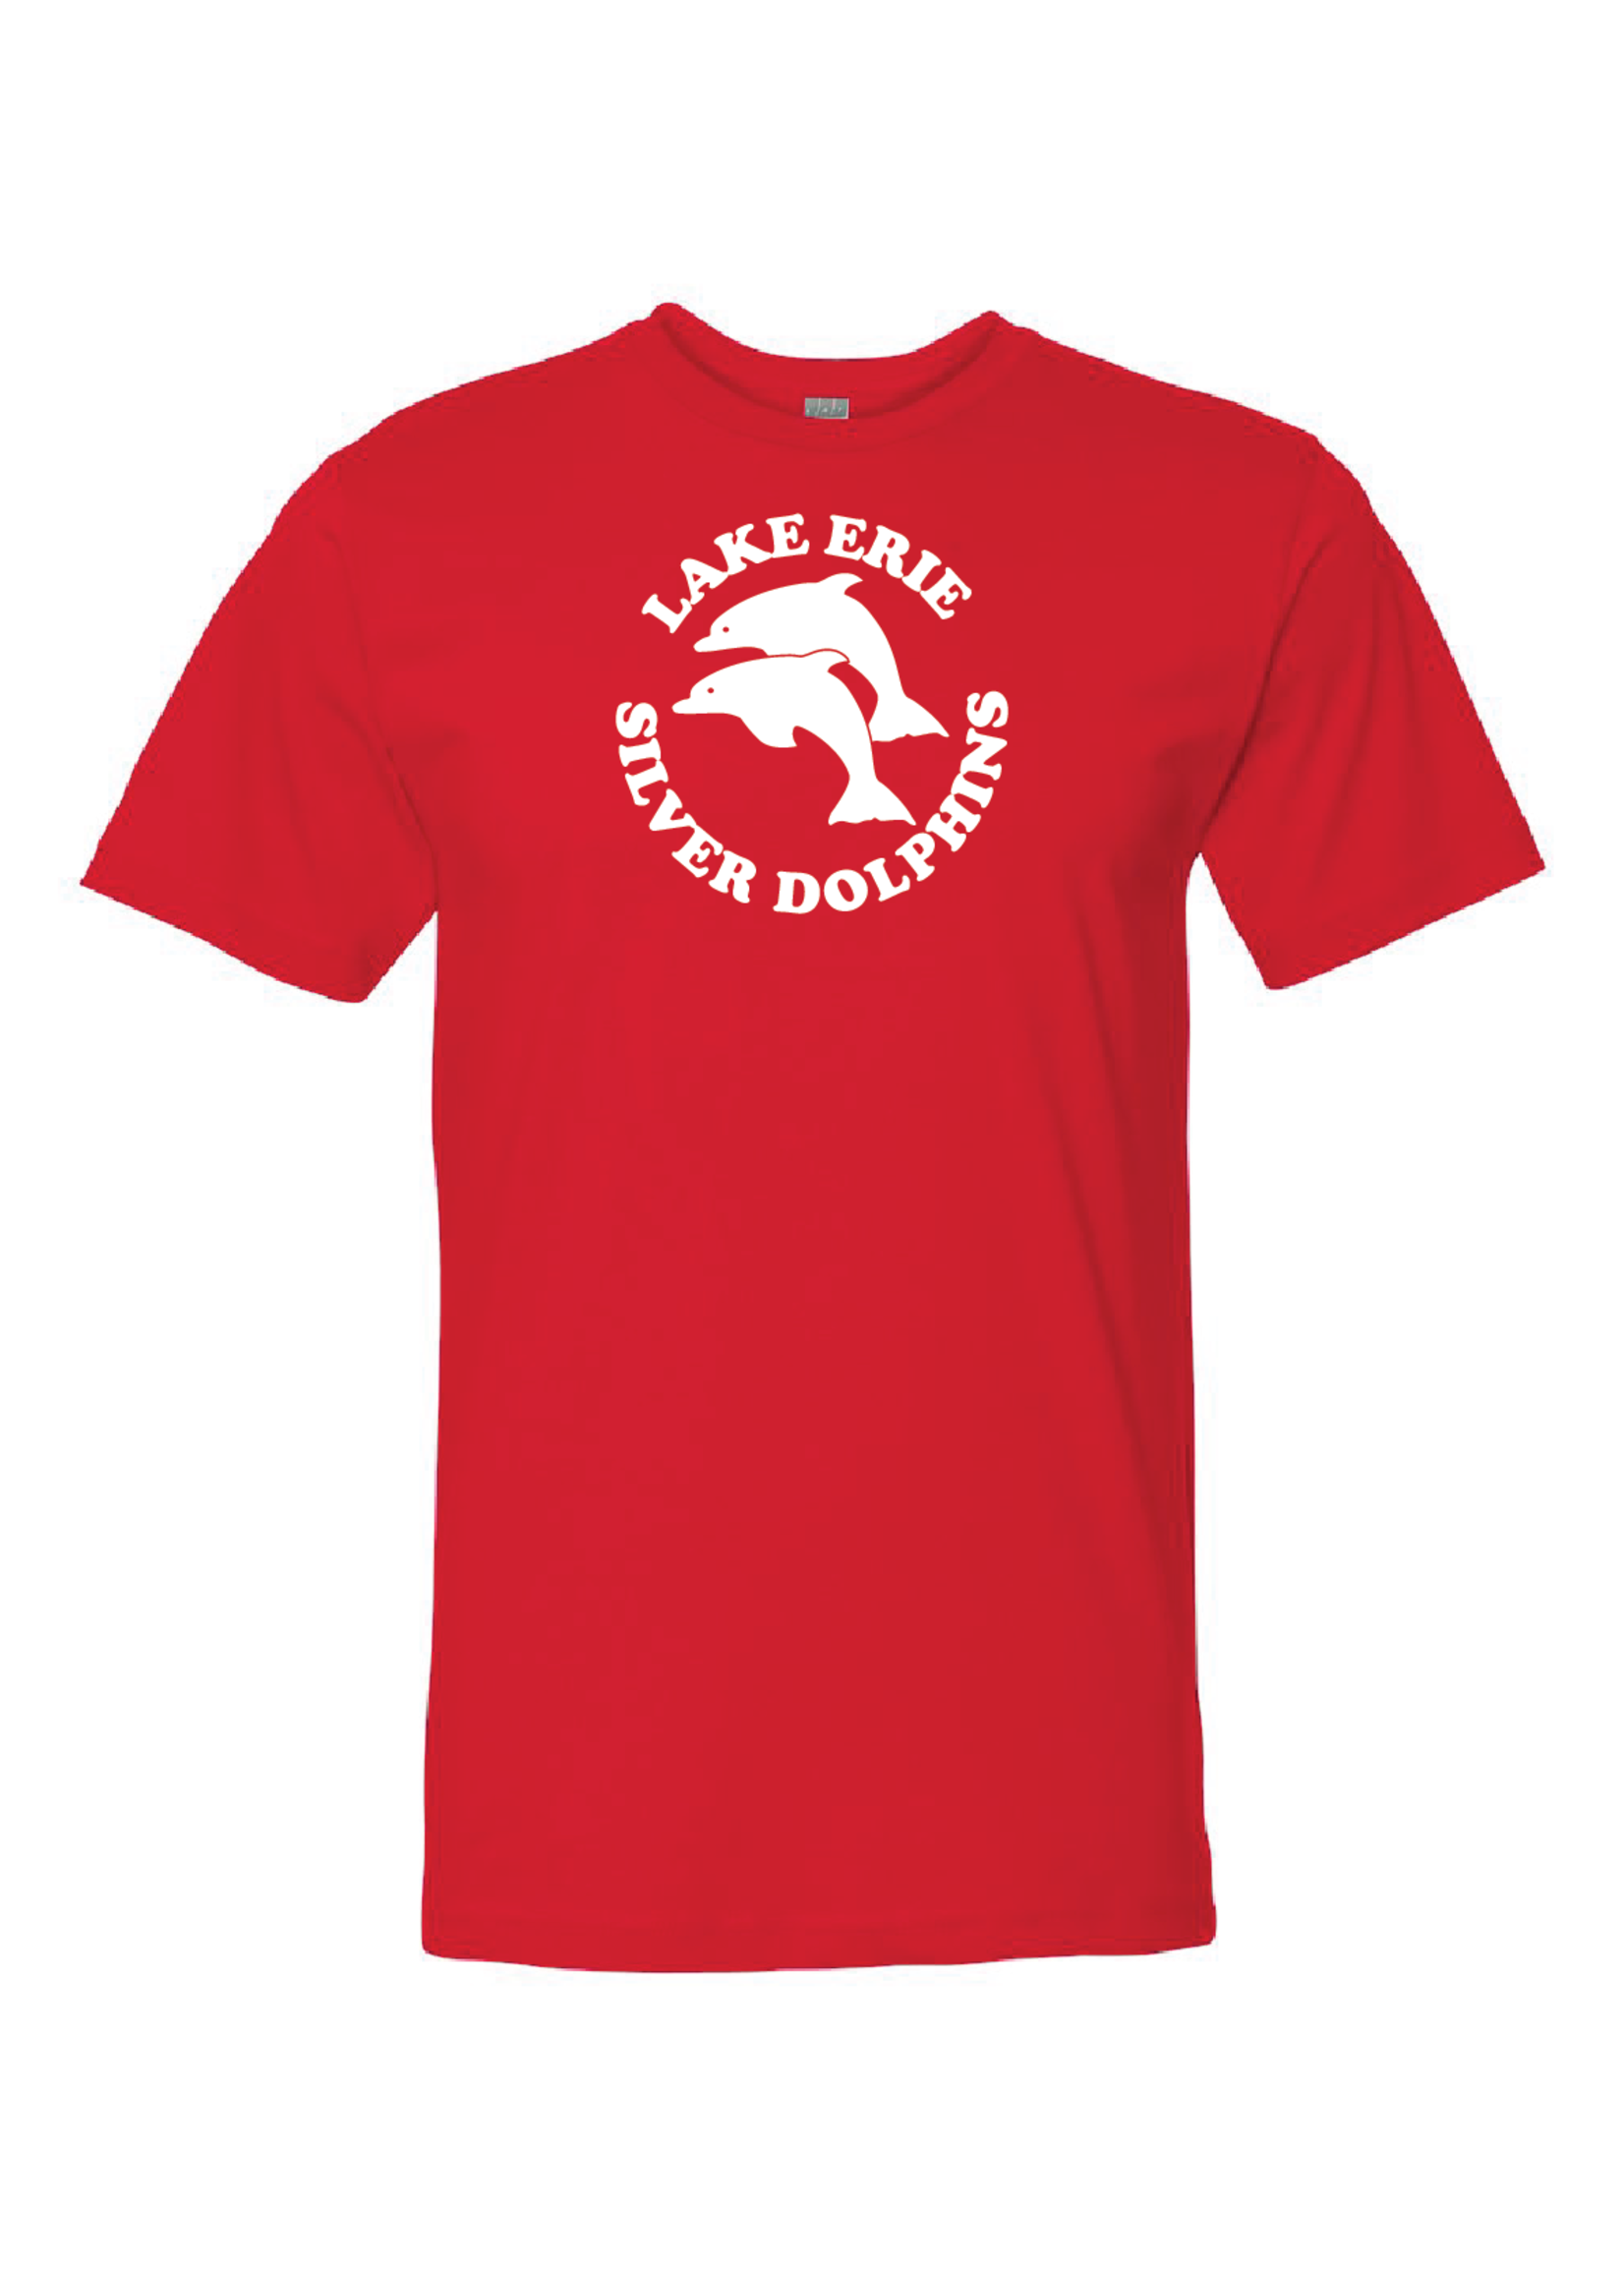 LESD T-shirt with large front logo